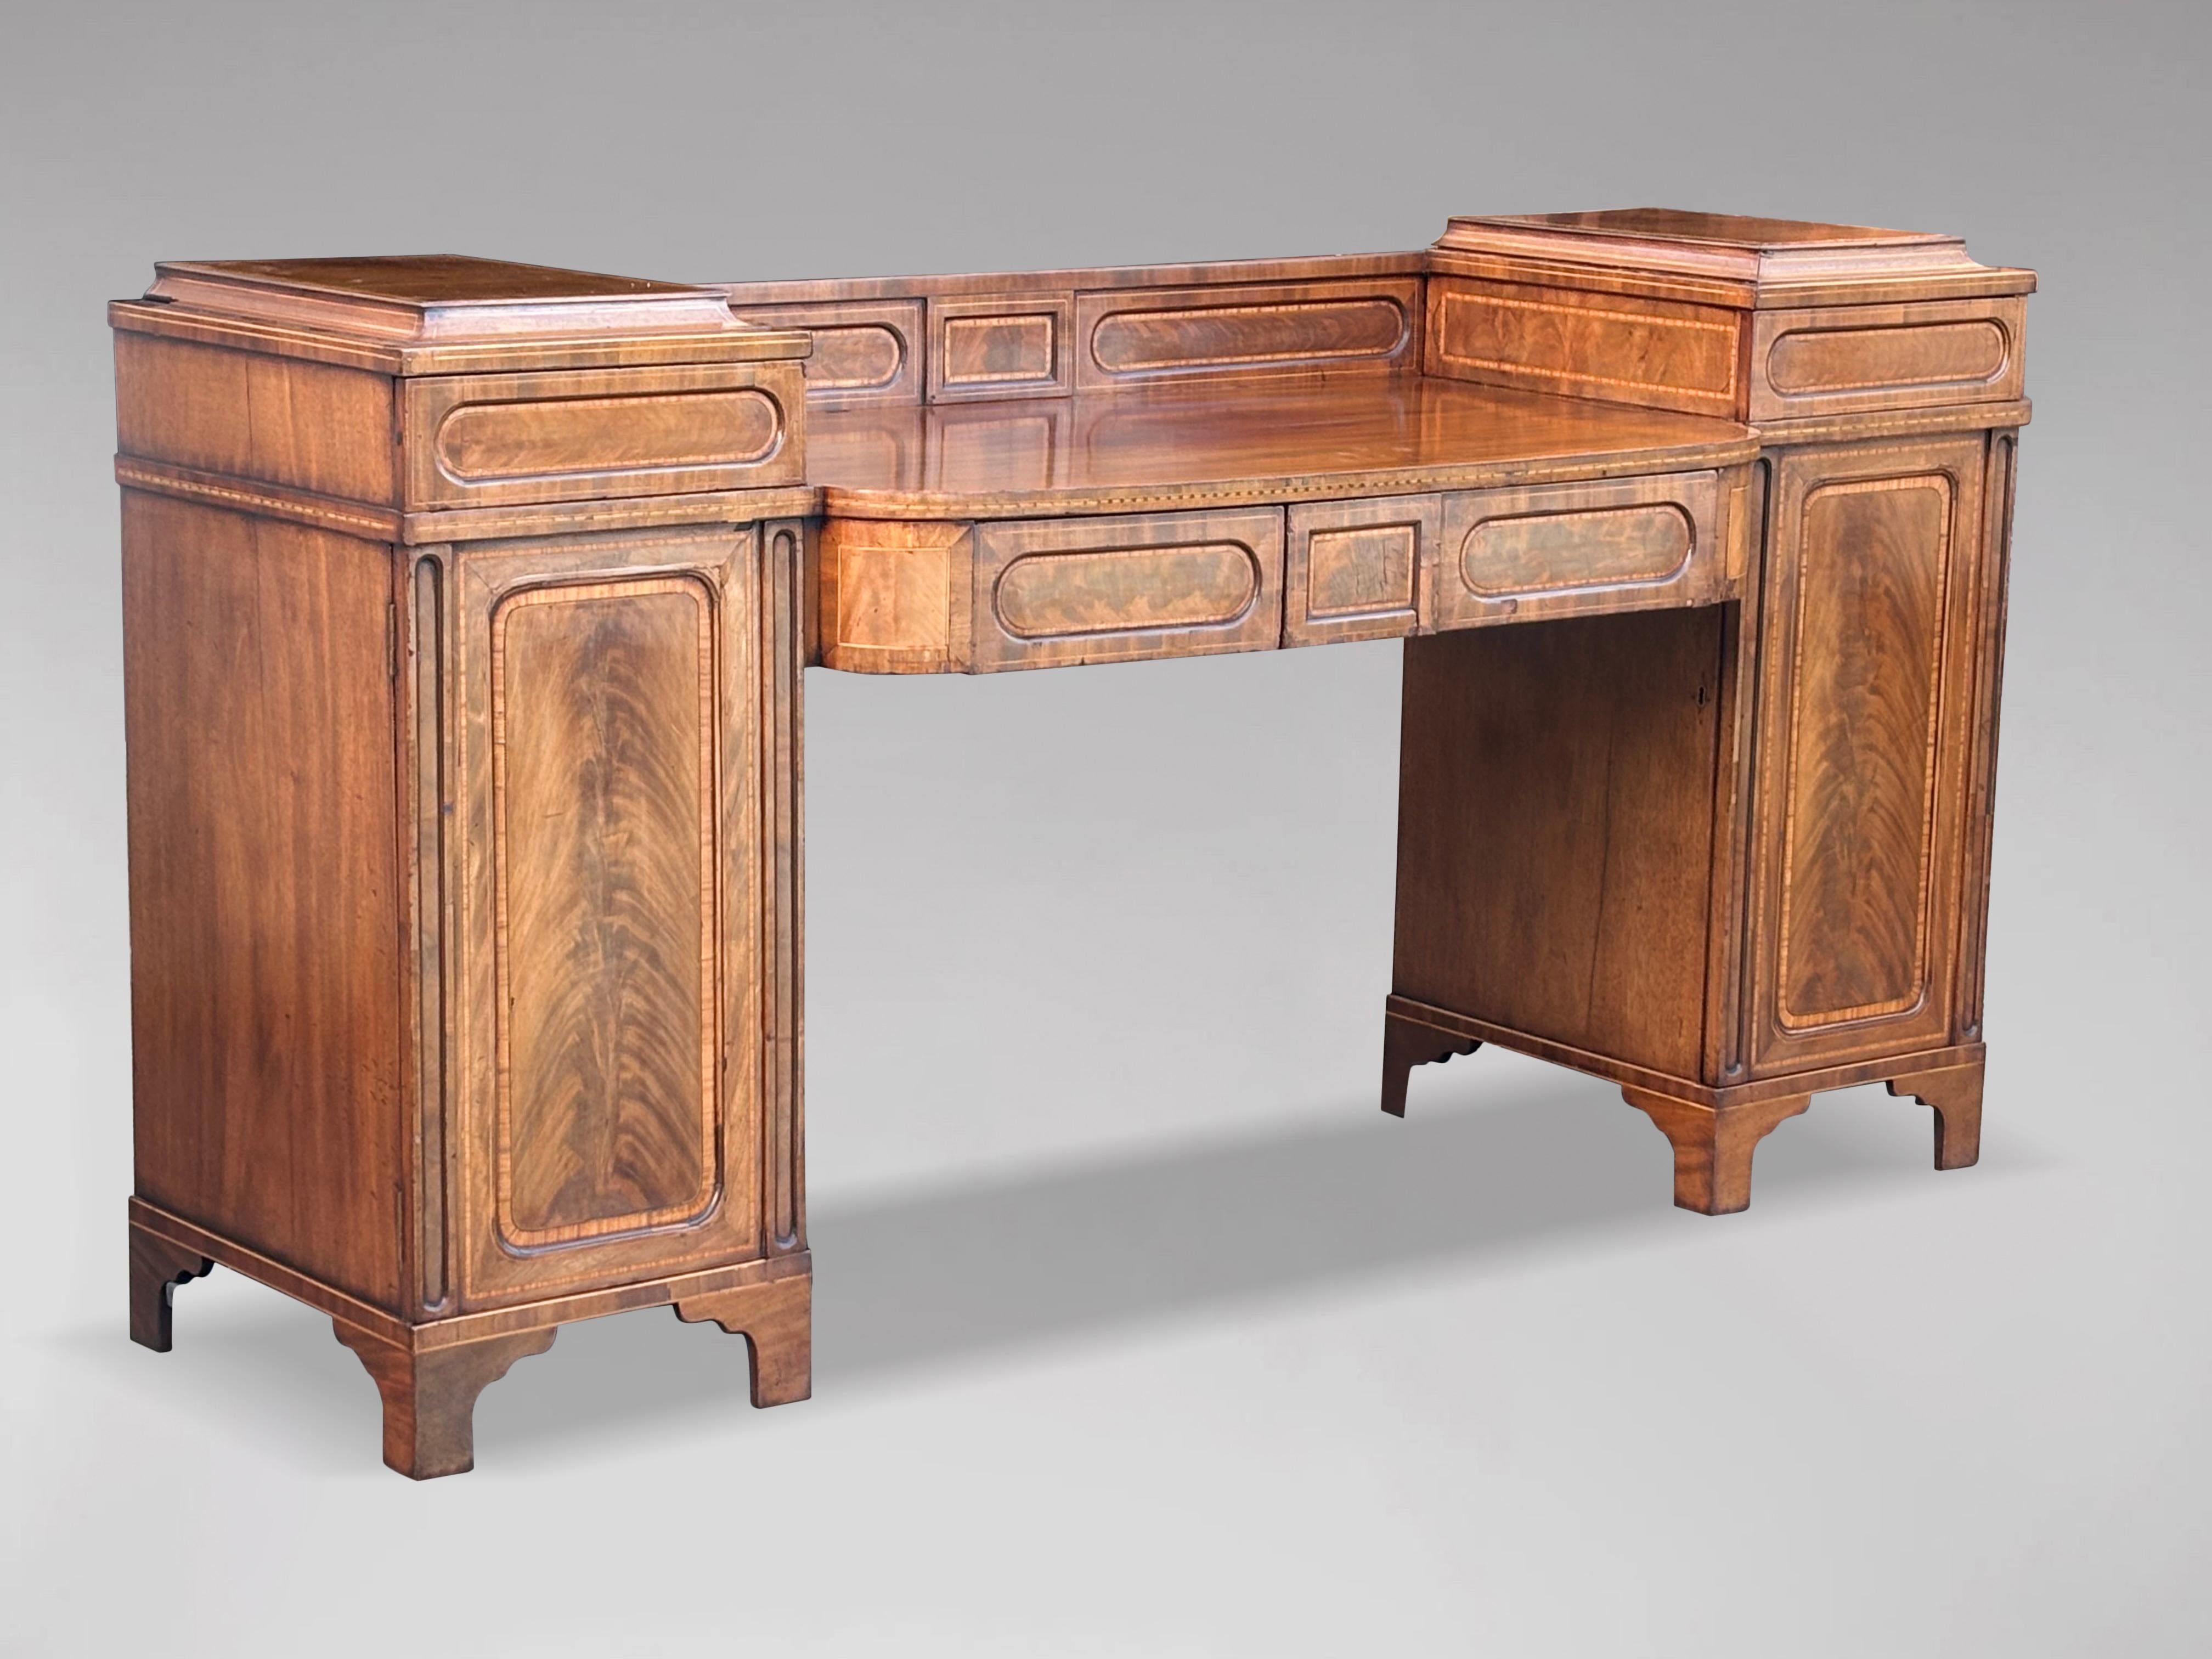 A late 18th century very fine and untouched George III period well figured mahogany pedestal sideboard. The bow fronted central section with satinwood and rosewood inlay and shaped with a straight inlaid back, above two long frieze drawers with